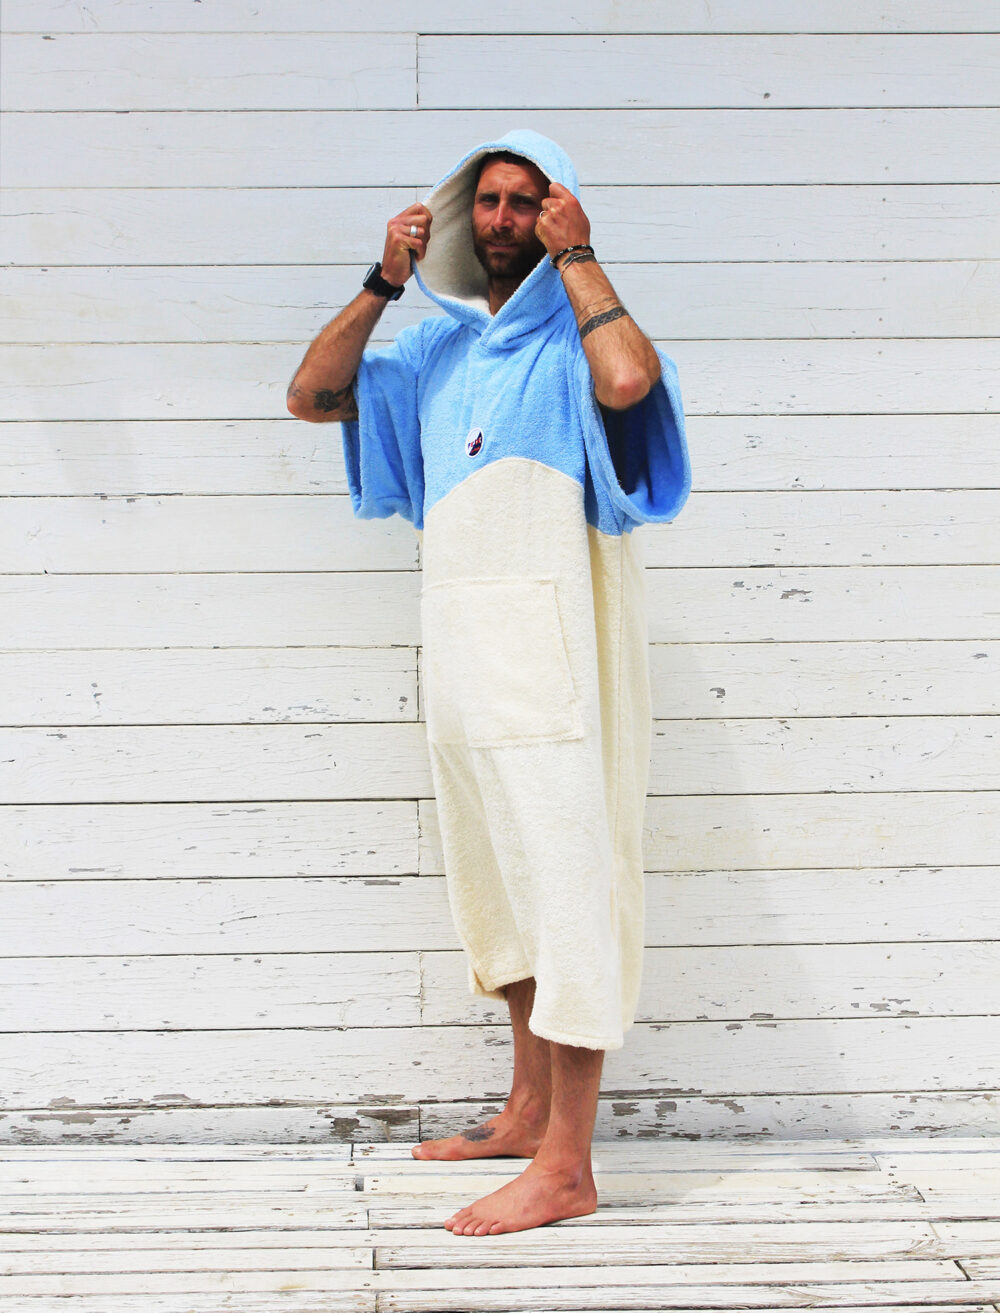 Surf Poncho and Changing Robe - Surf Accessories by Fede Surfbags